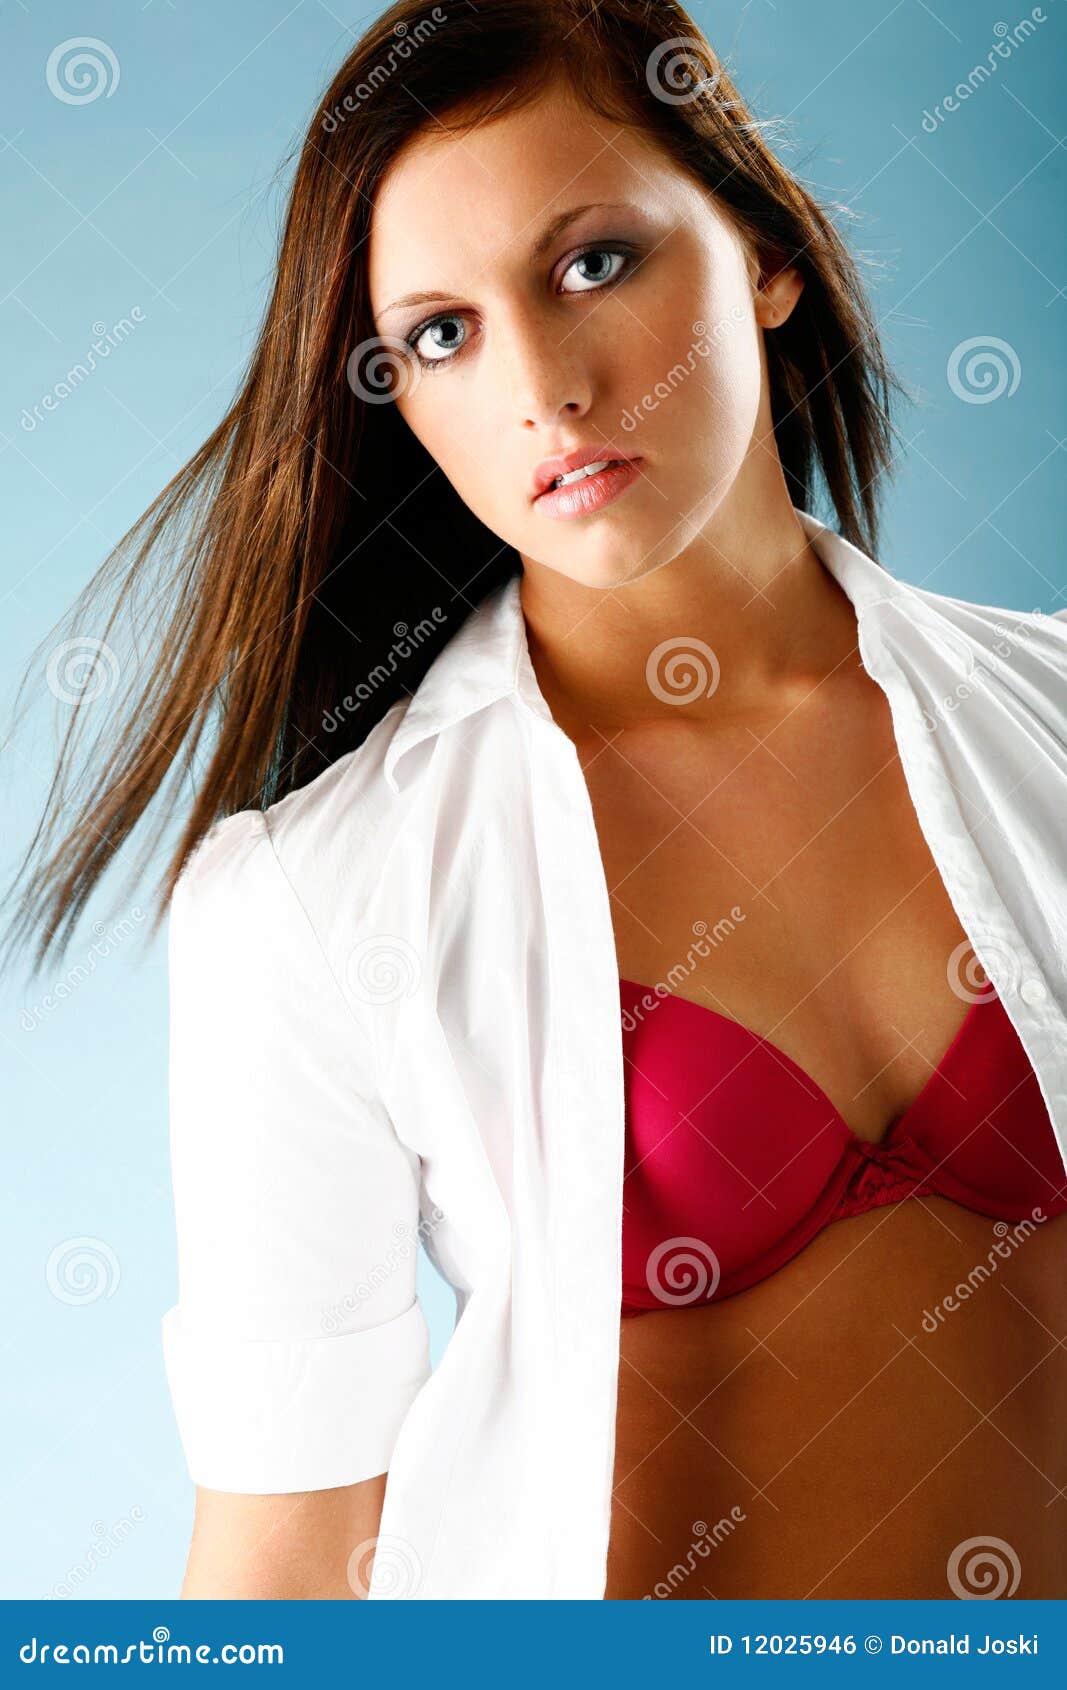 Photo about Young woman poses wearing white button shirt in studio. 